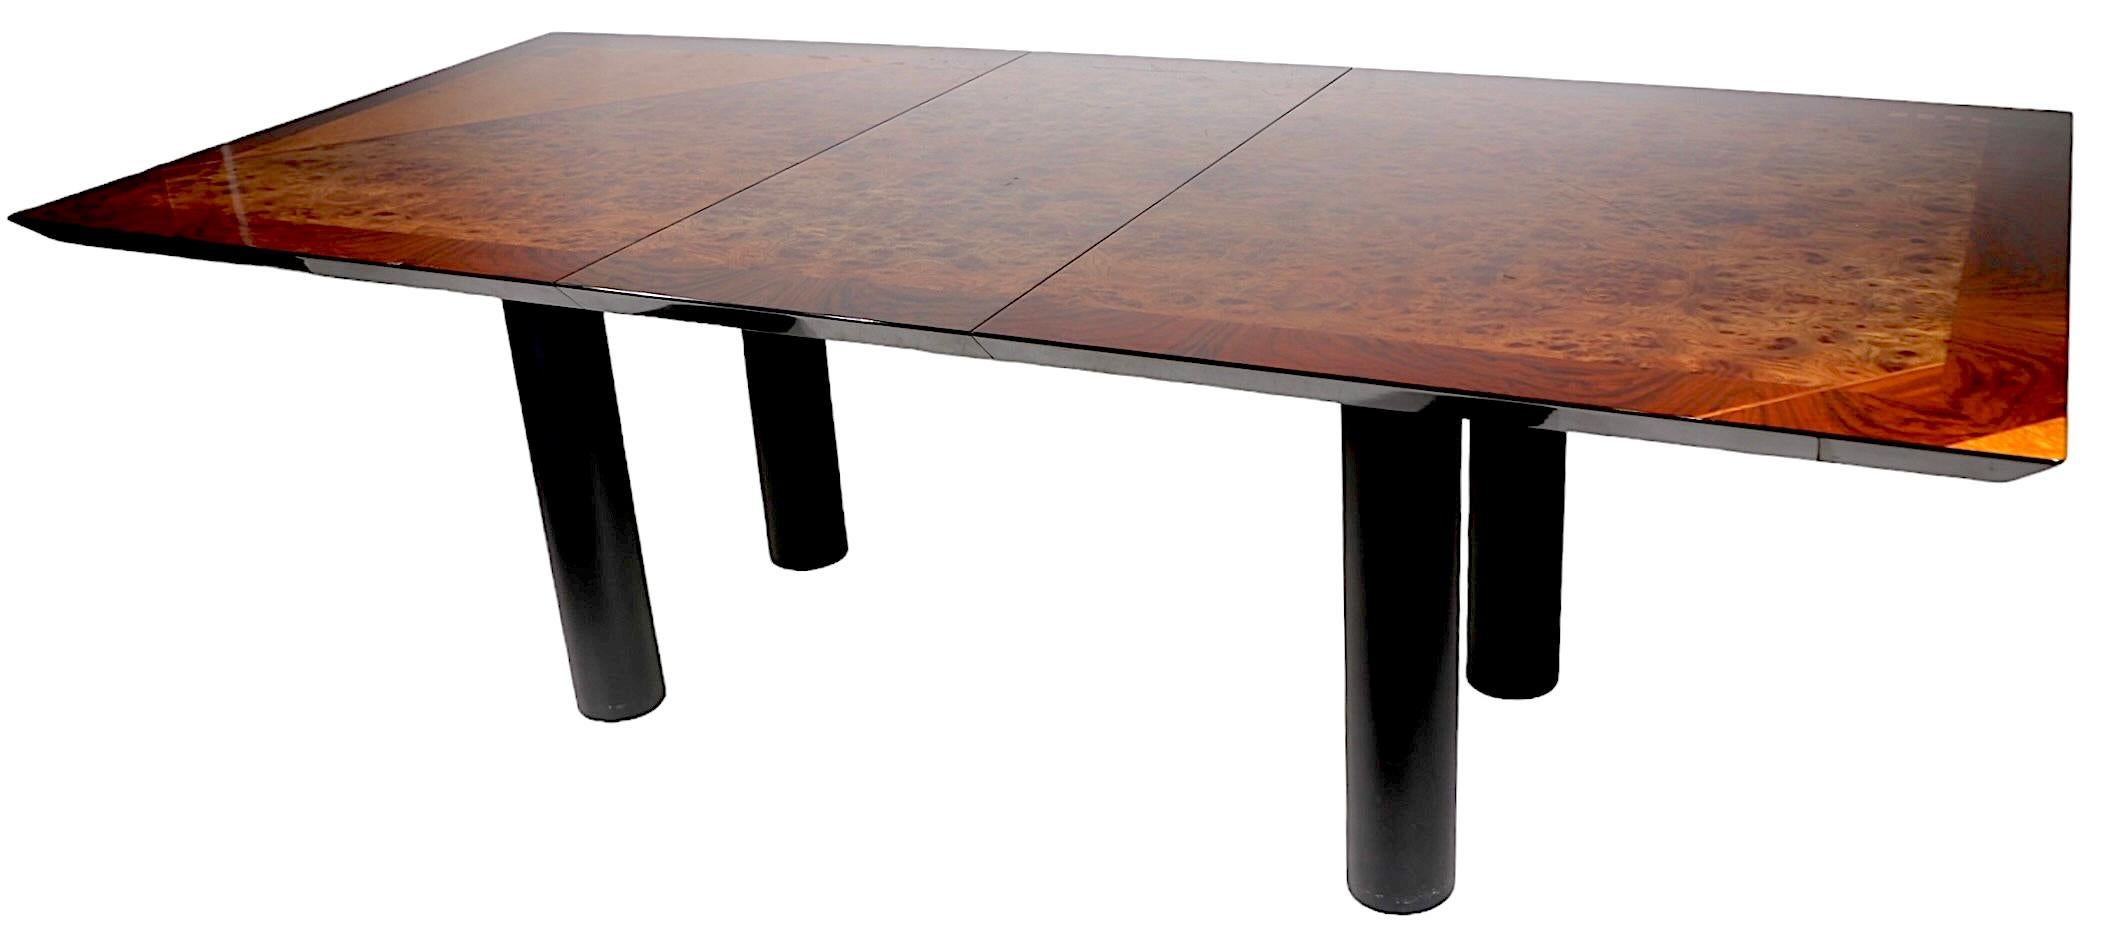 Post-Modern Italian Post Modern Dining Table by Oscar Dell Arredamento for Miniforms c 1970s For Sale